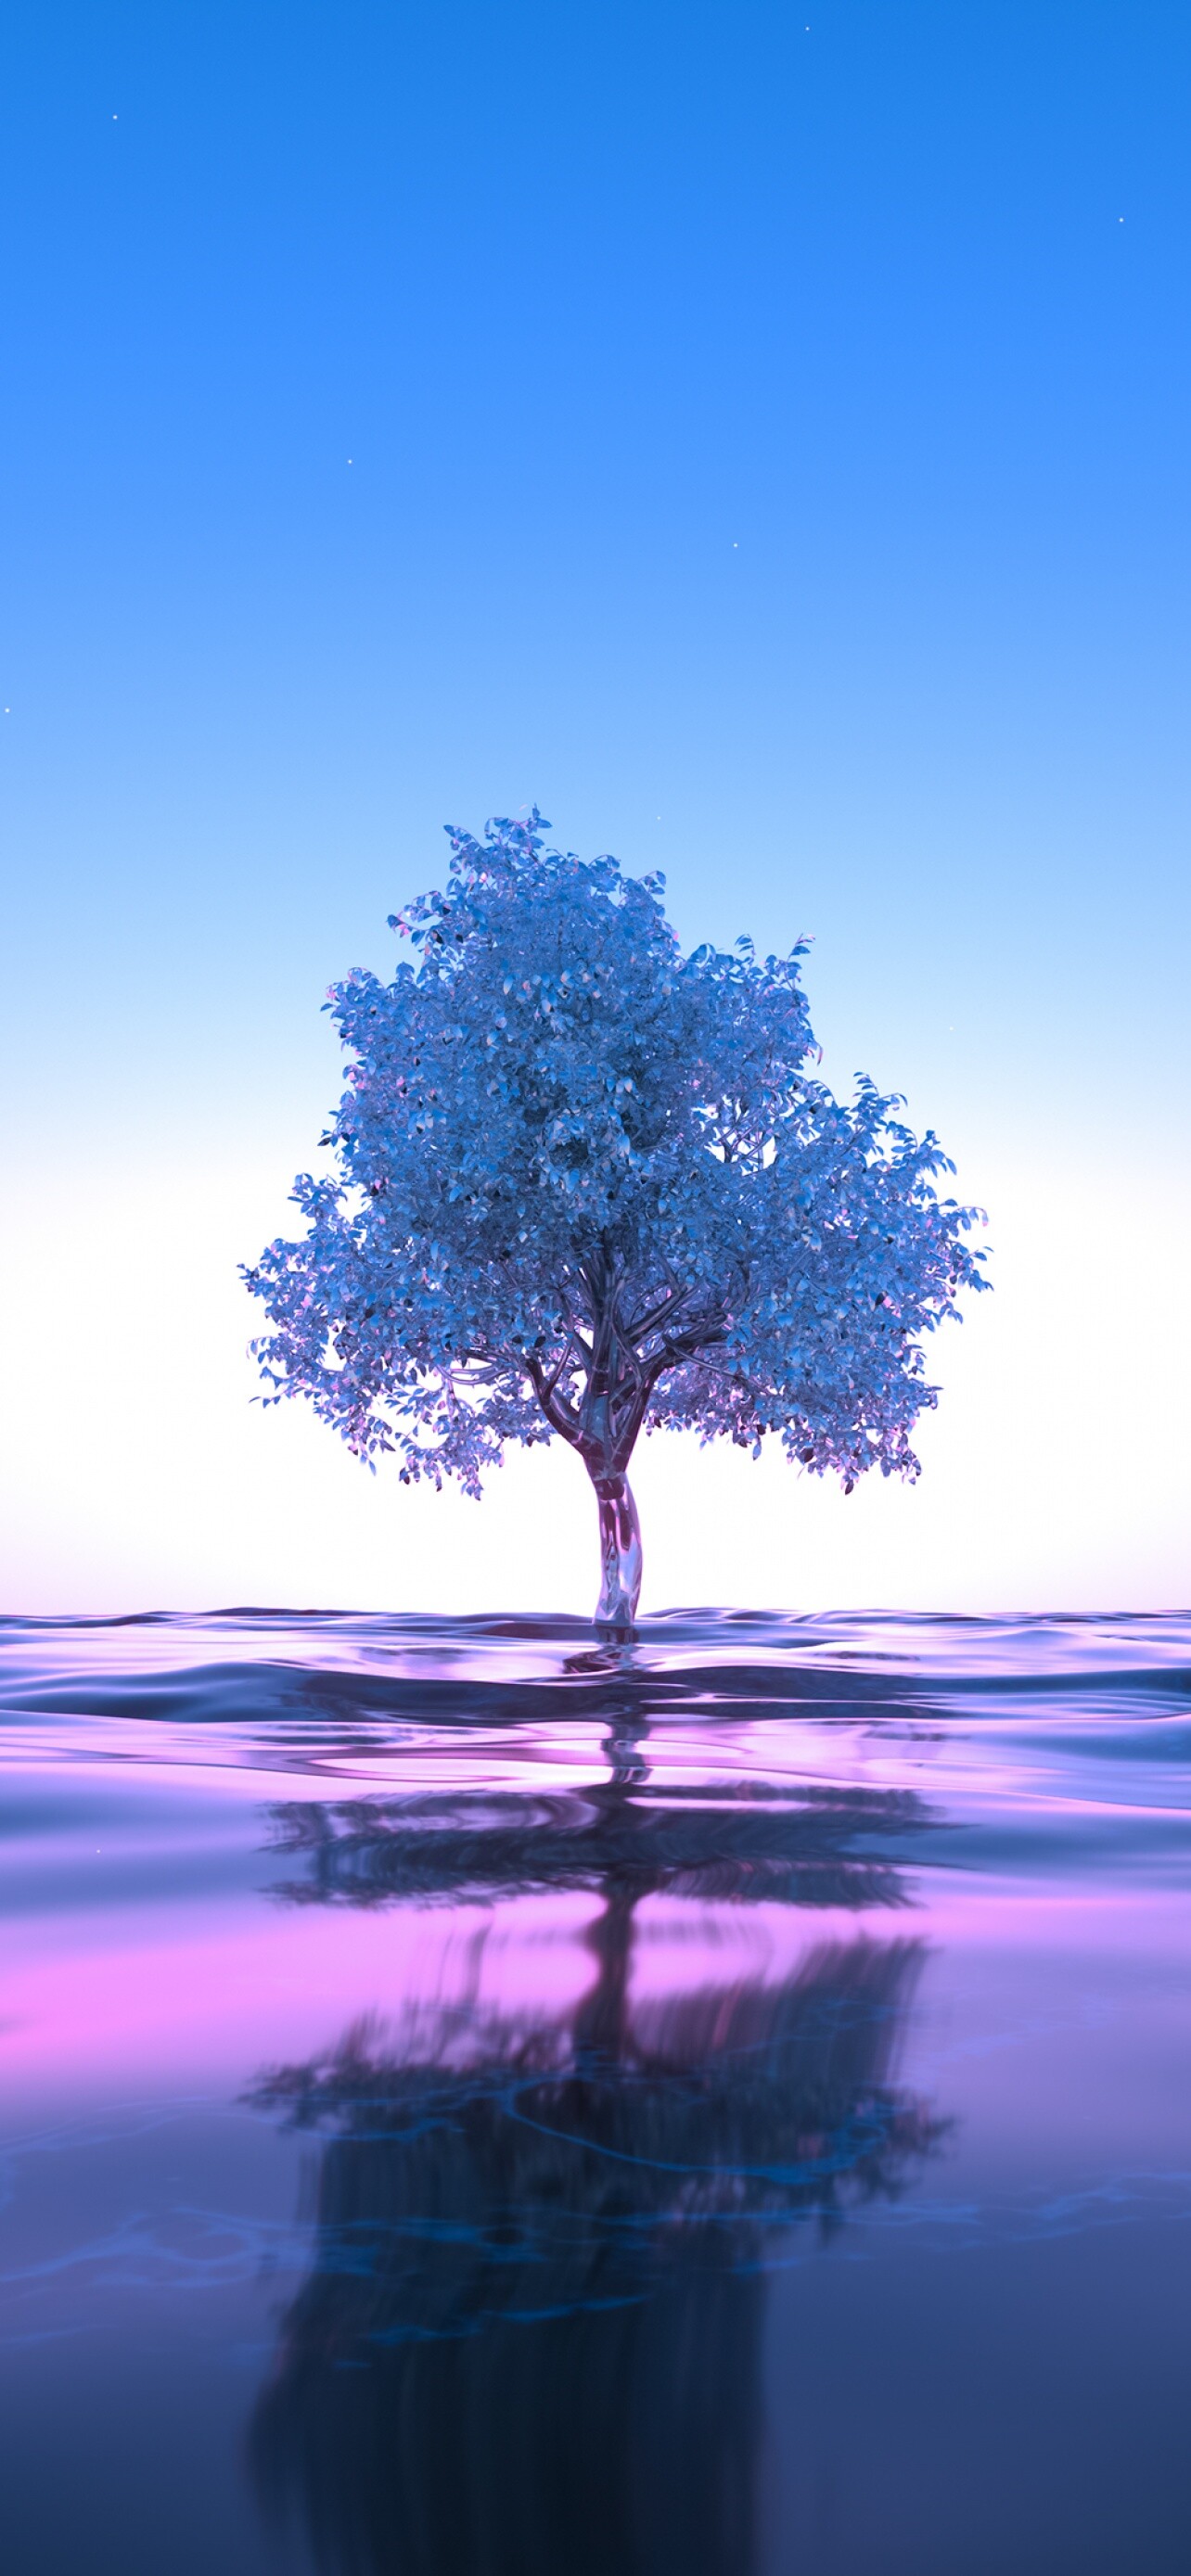 Neon tree against clear sky, Reflecting tranquility, Pink harmony, Nature's serenade, 1290x2780 HD Phone